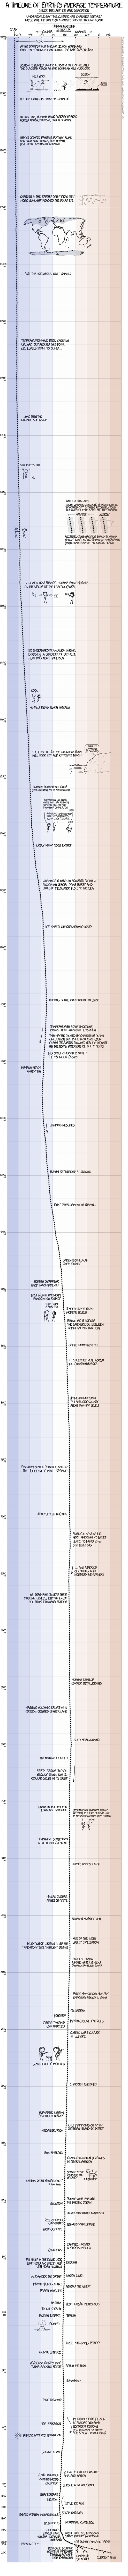 IMAGE(http://imgs.xkcd.com/comics/earth_temperature_timeline.png)